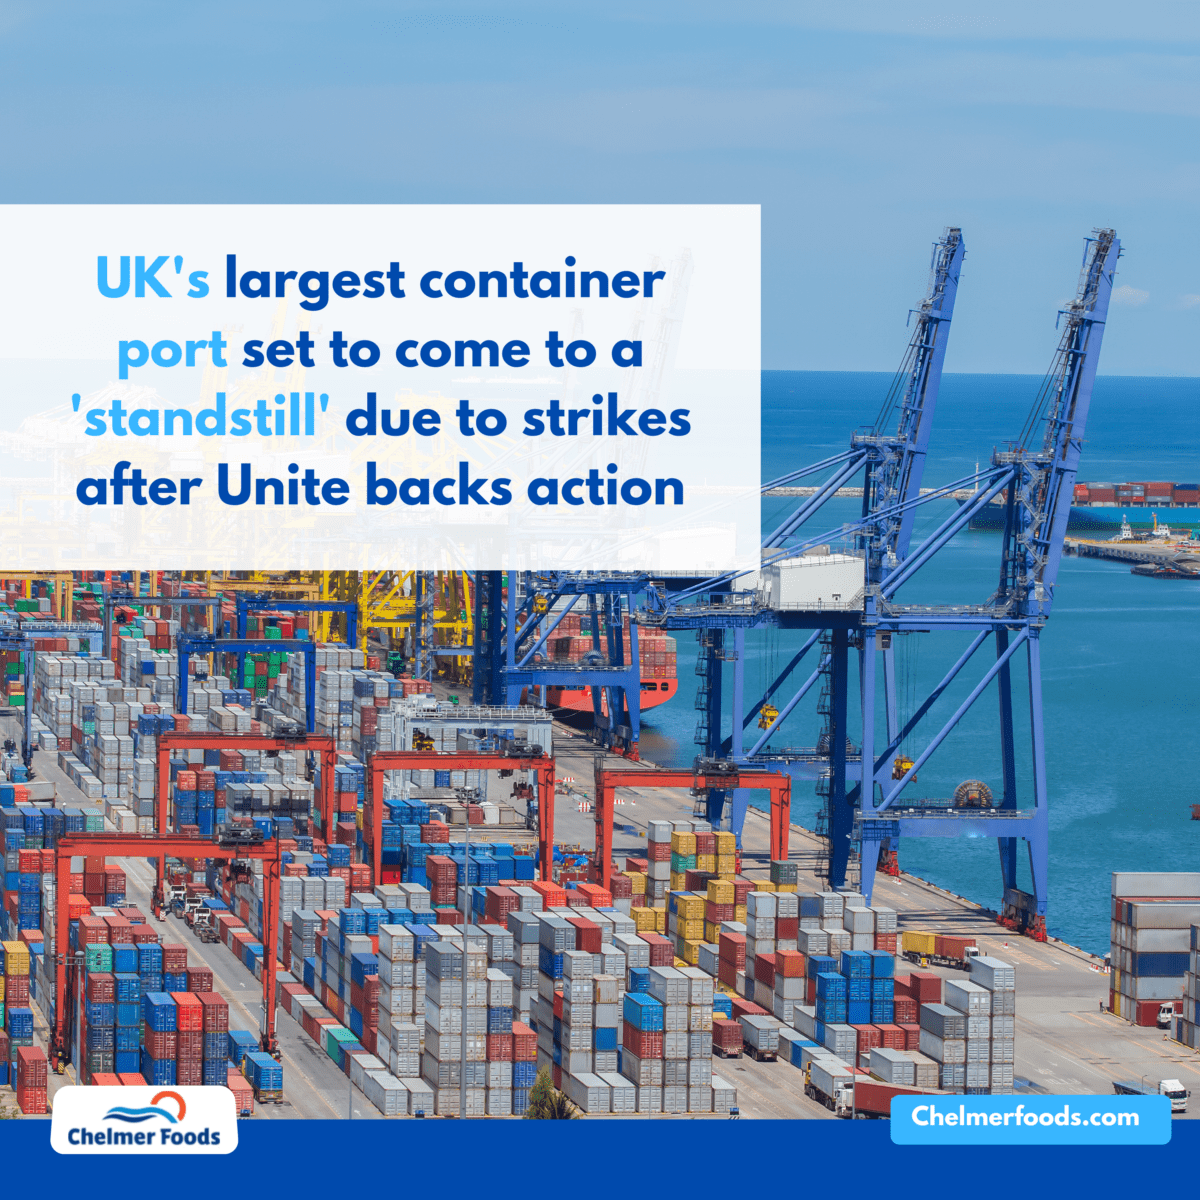 UK's largest container port set to come to a 'standstill' due to strikes after Unite backs action